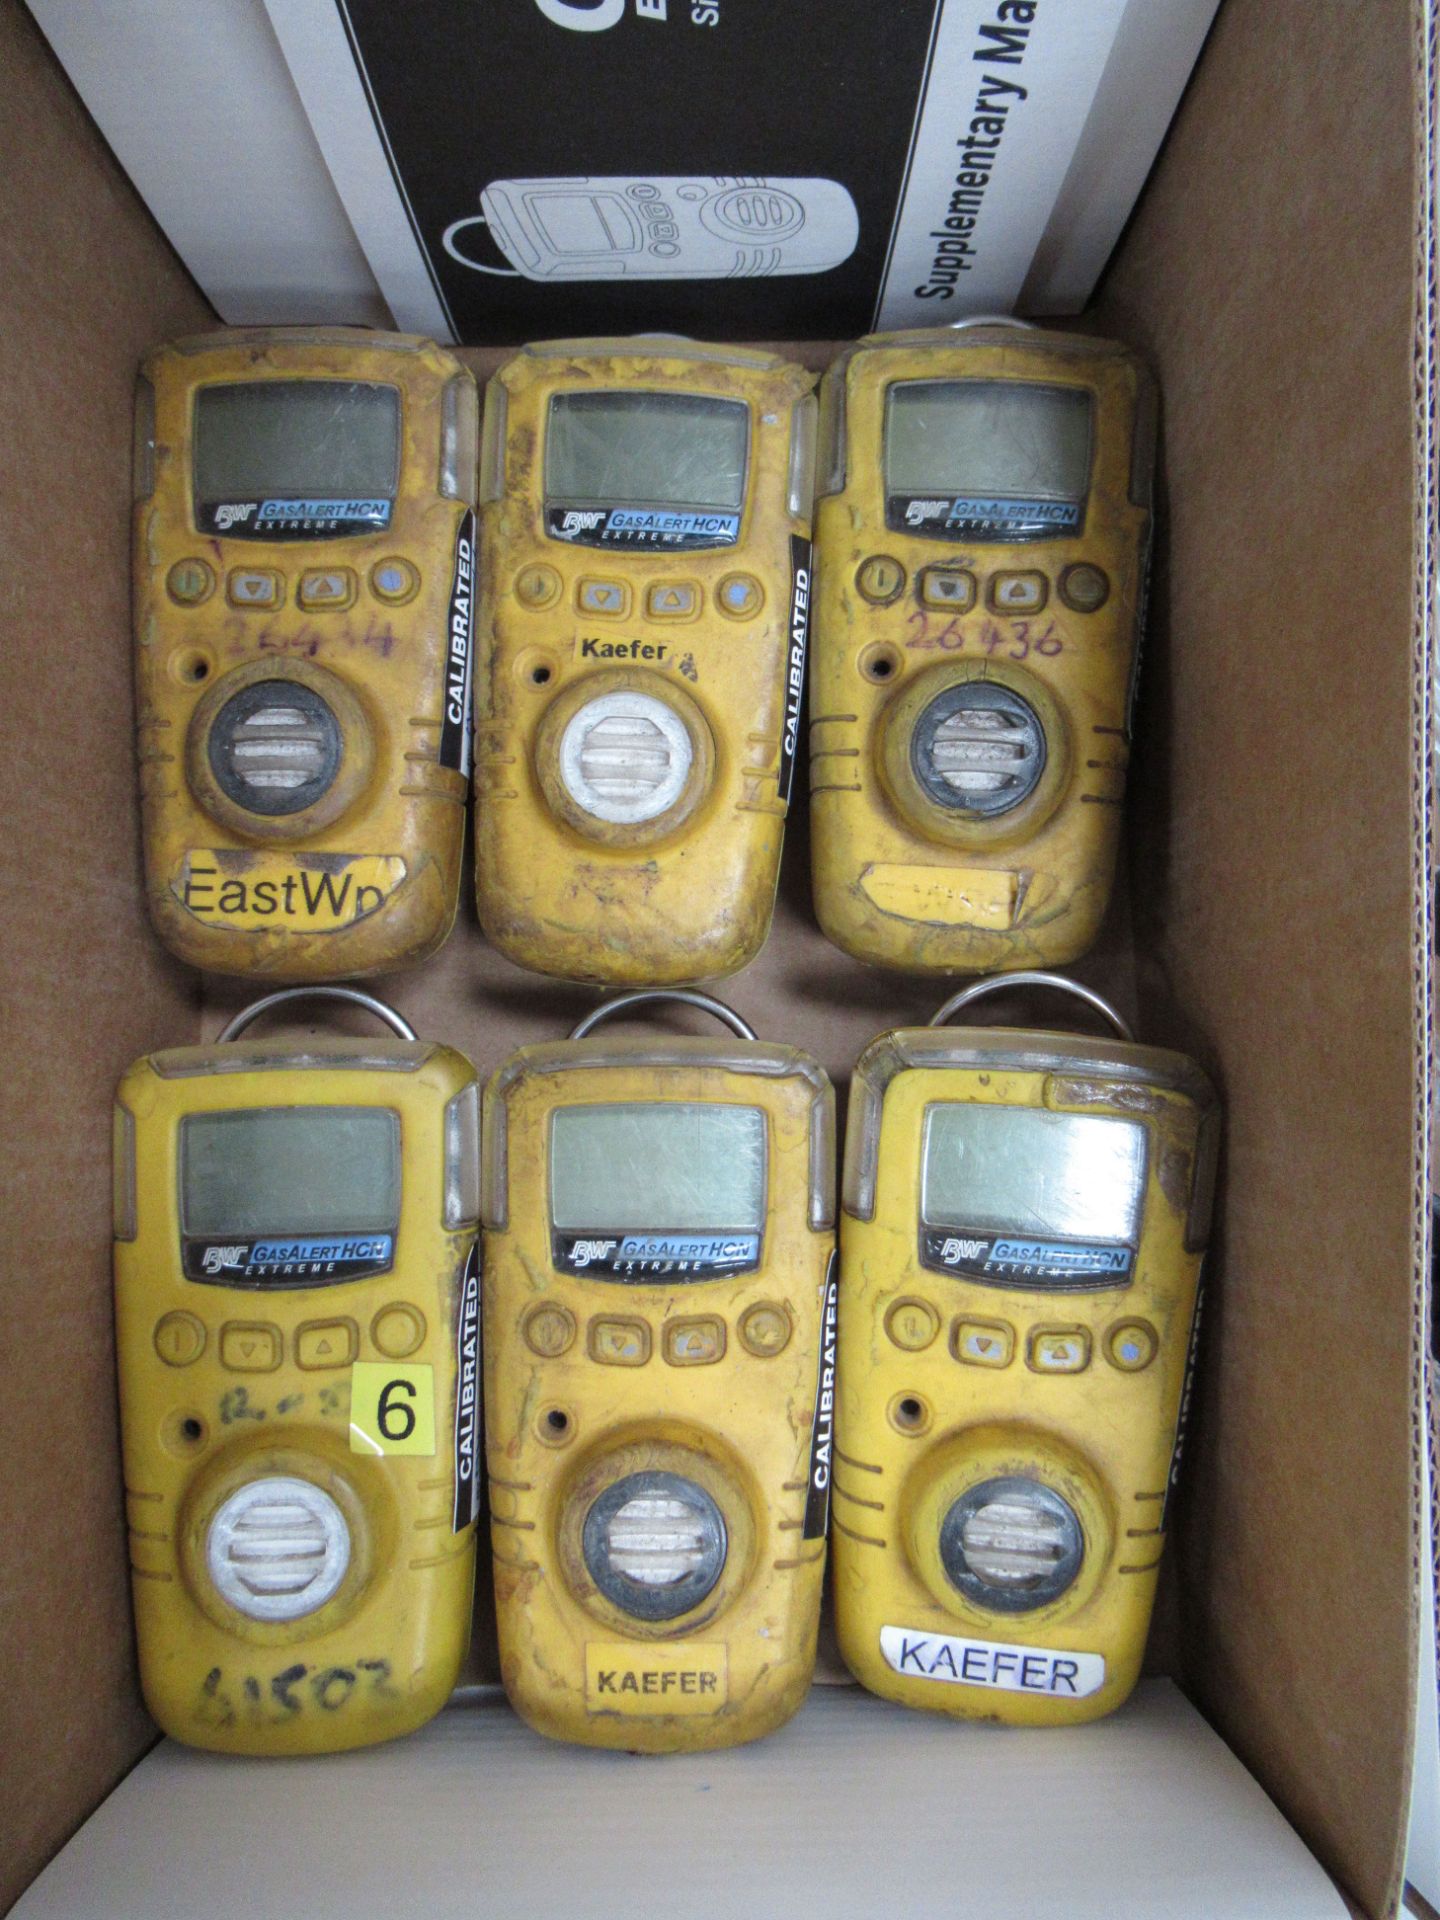 12x BW (By Honeywell) Gas Alert HCNExtreme Gas Detectors - Image 2 of 4